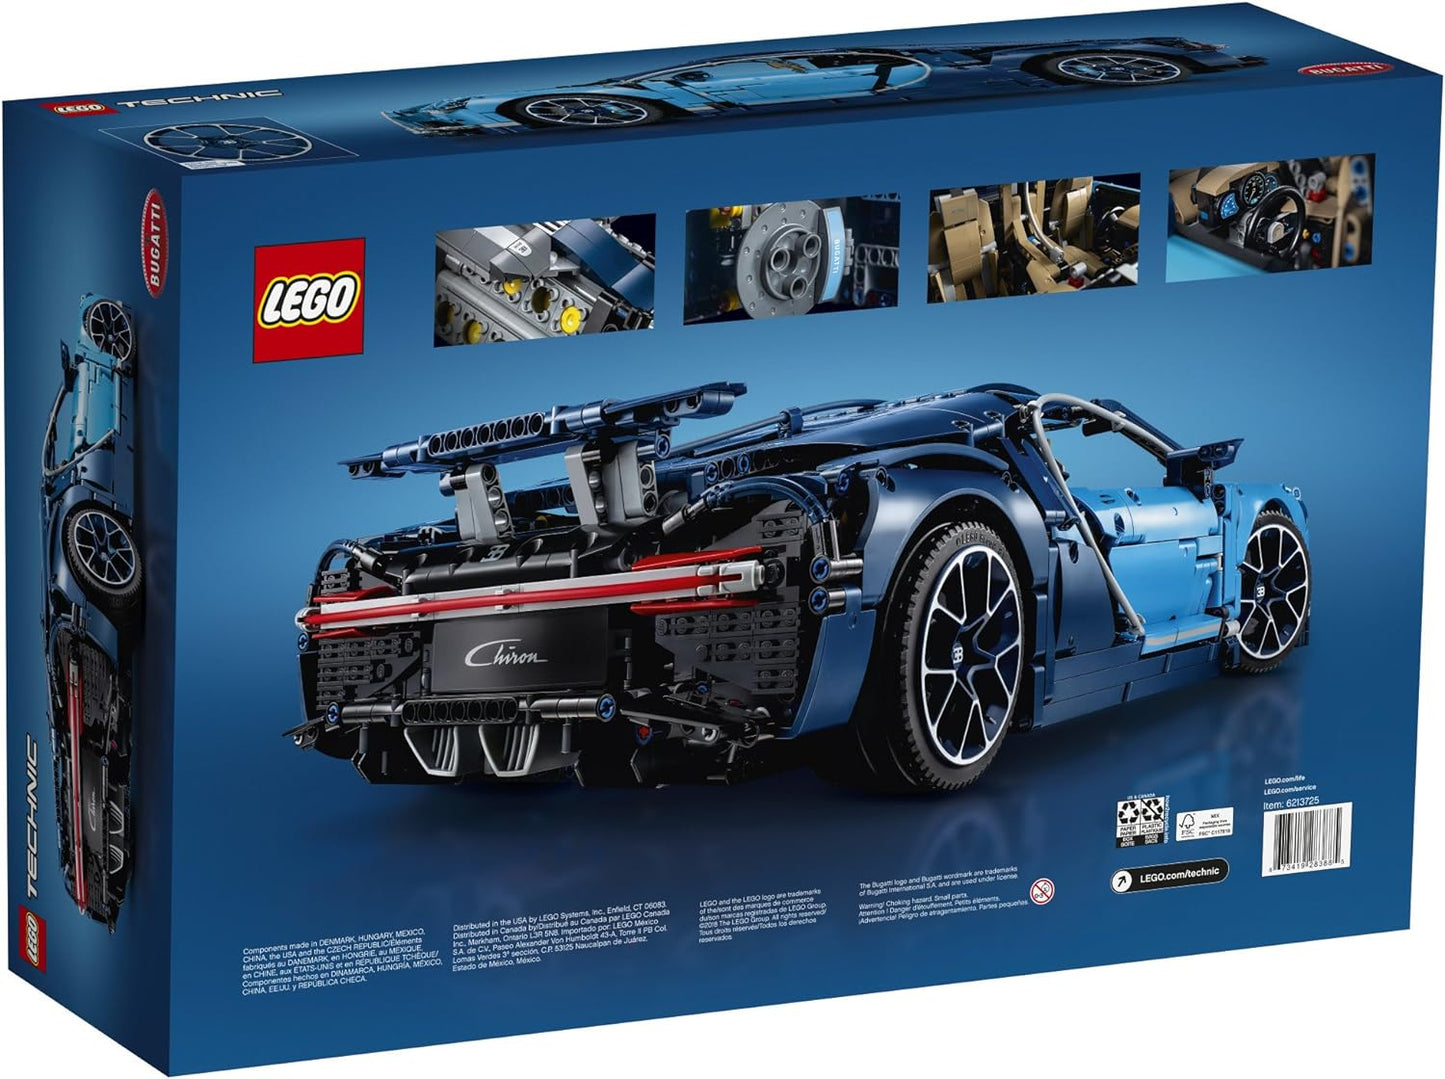 LEGO Technic Bugatti Chiron 42083 Race Car Building Kit and Engineering Toy, Adult Collectible Sports Car with Scale Model Engine (3599 Pieces)